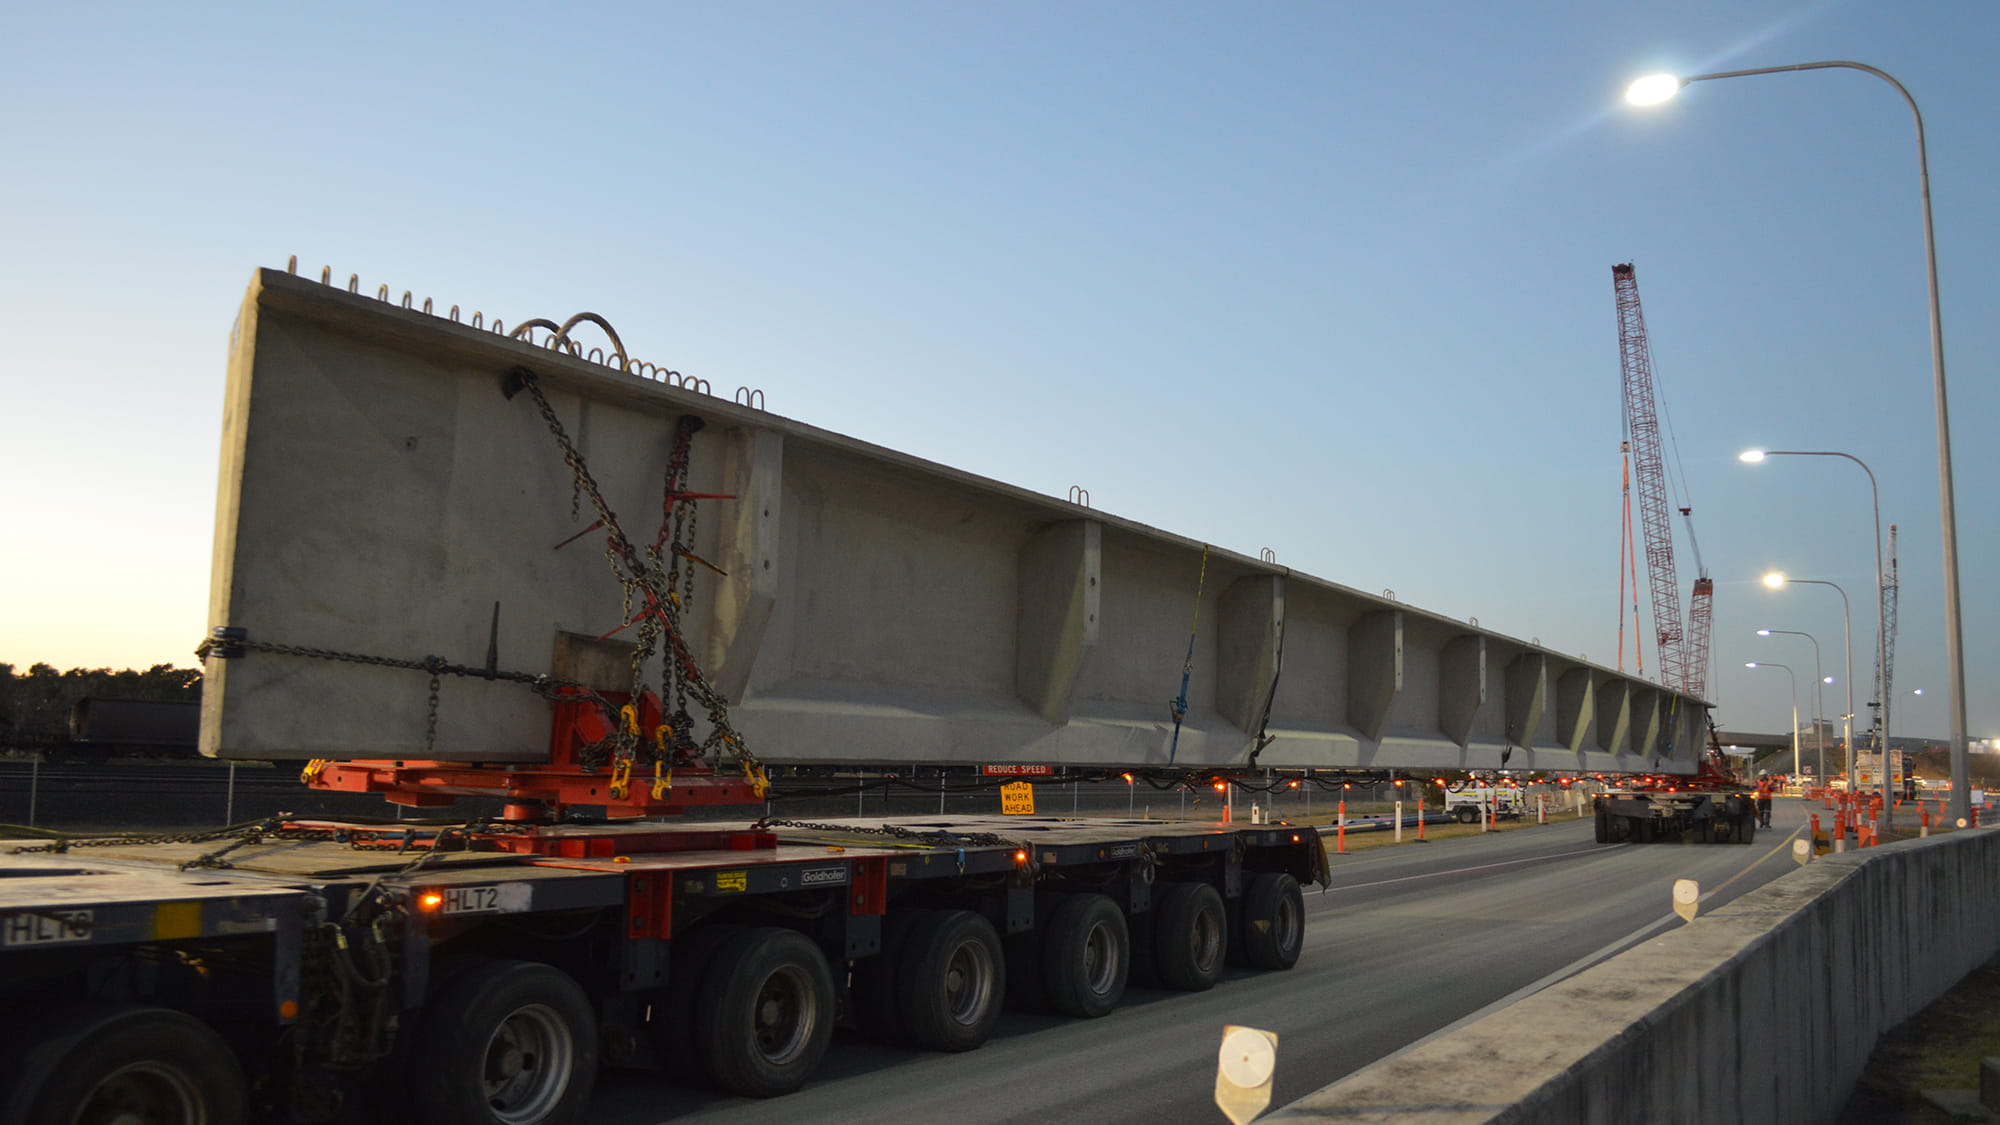 Quickcell Super Girder transport arriving at the Port of Brisbane as part of the Port Drive Upgrade project